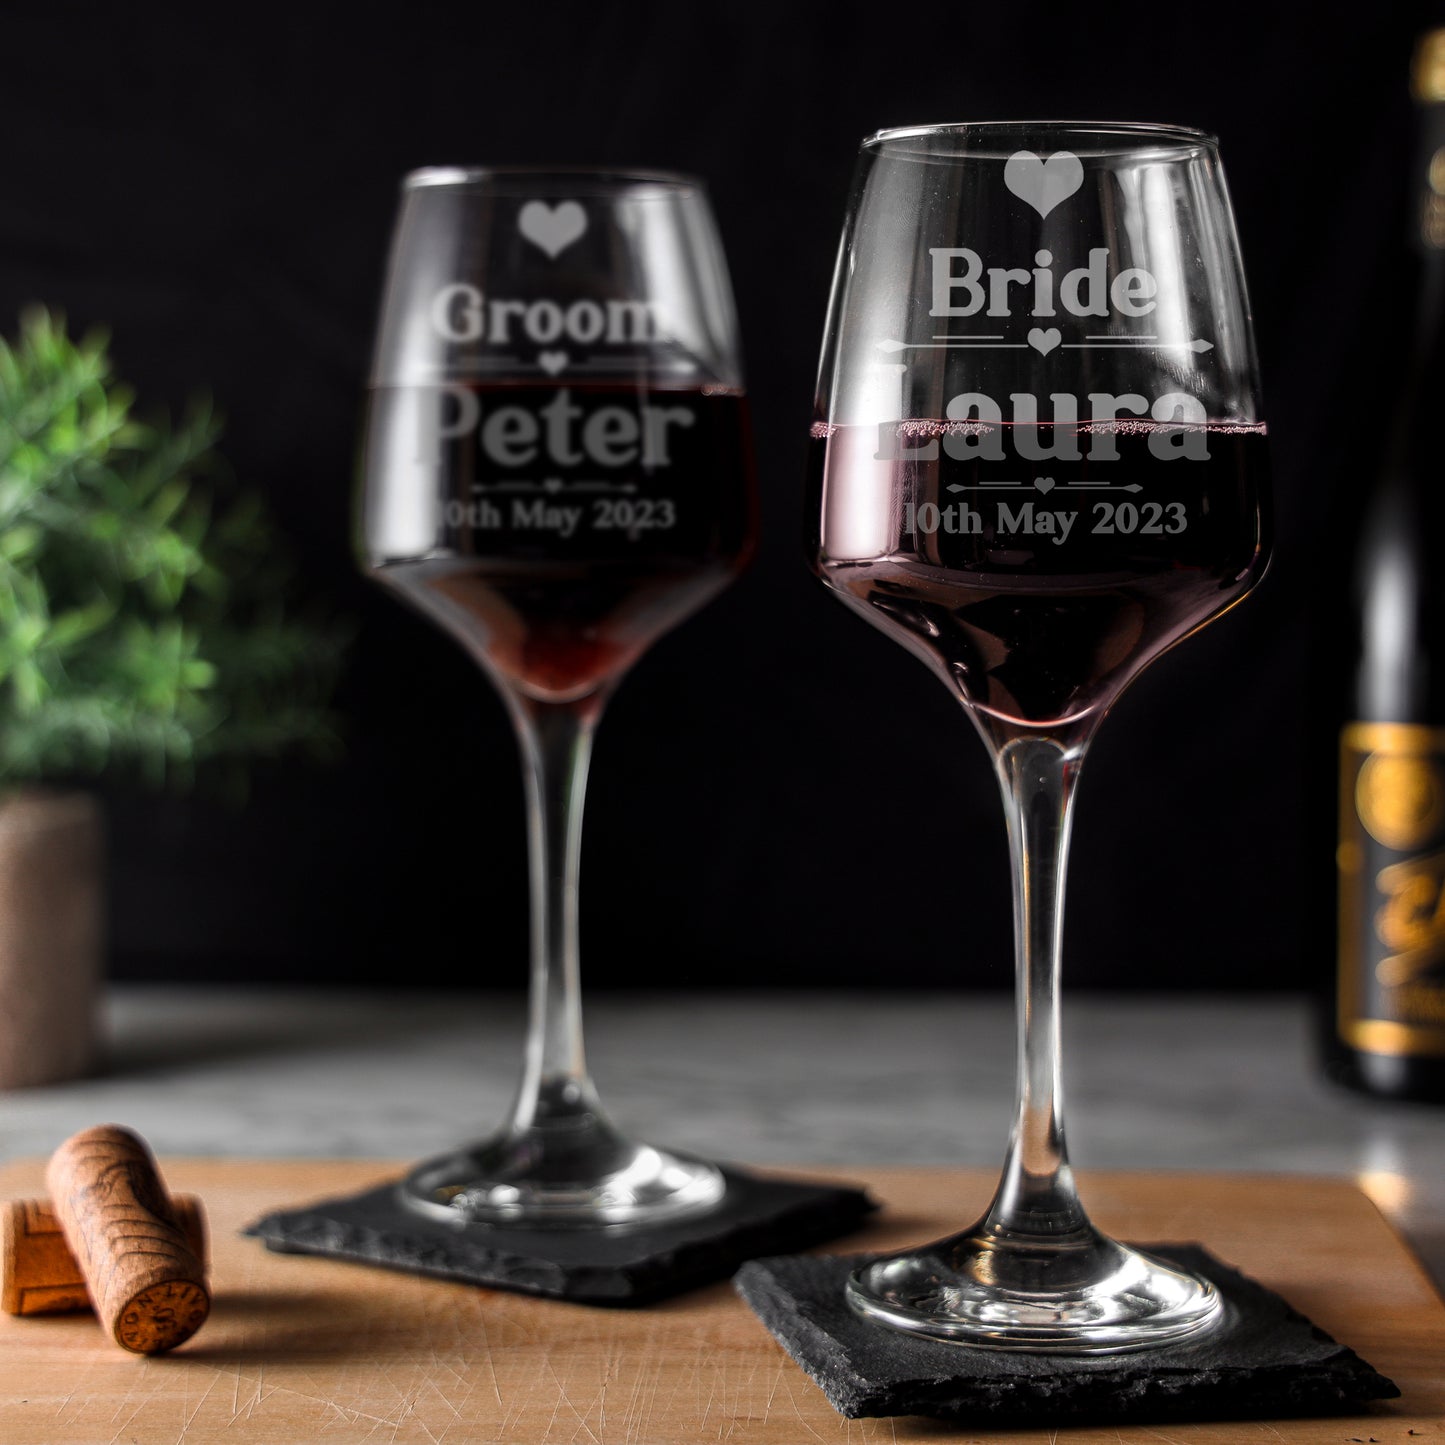 Personalised Bride & Groom Engraved Glass and/or Coaster Wedding Gift Set  - Always Looking Good - 2 x Wine Glass Only  